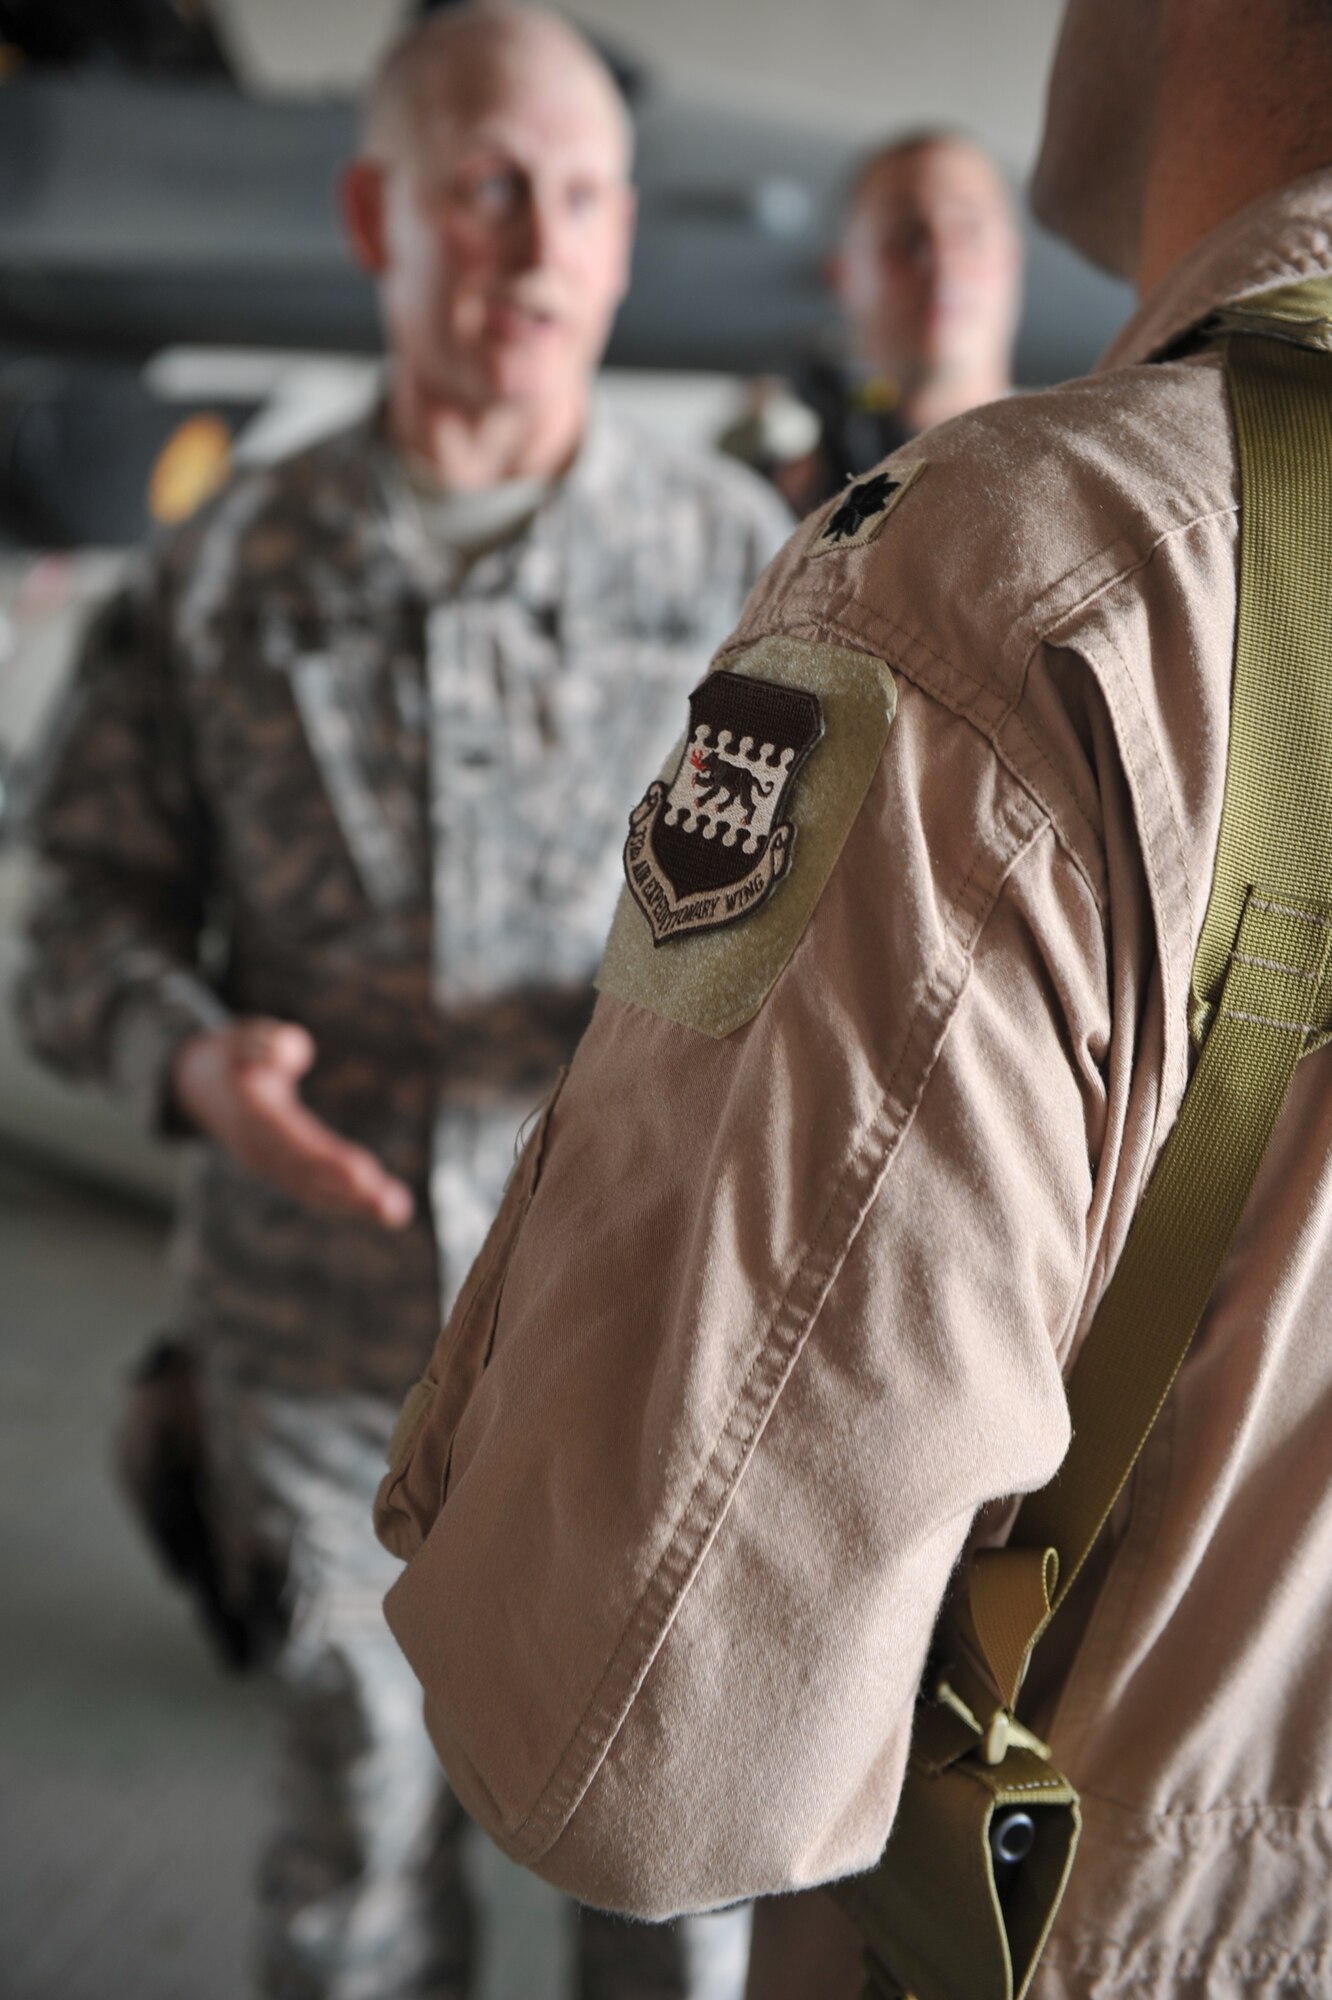 Col. Steven Bensend (left) talks with Lt. Col. Erik Peterson at an air base in Iraq. Bensend commands 3,200 Wisconsin Army Guard Soldiers on the ground, while Peterson commands about 300 Wisconsin Air Guard troops providing air support. (U.S. Army photo by Spc. Tyler Lasure)